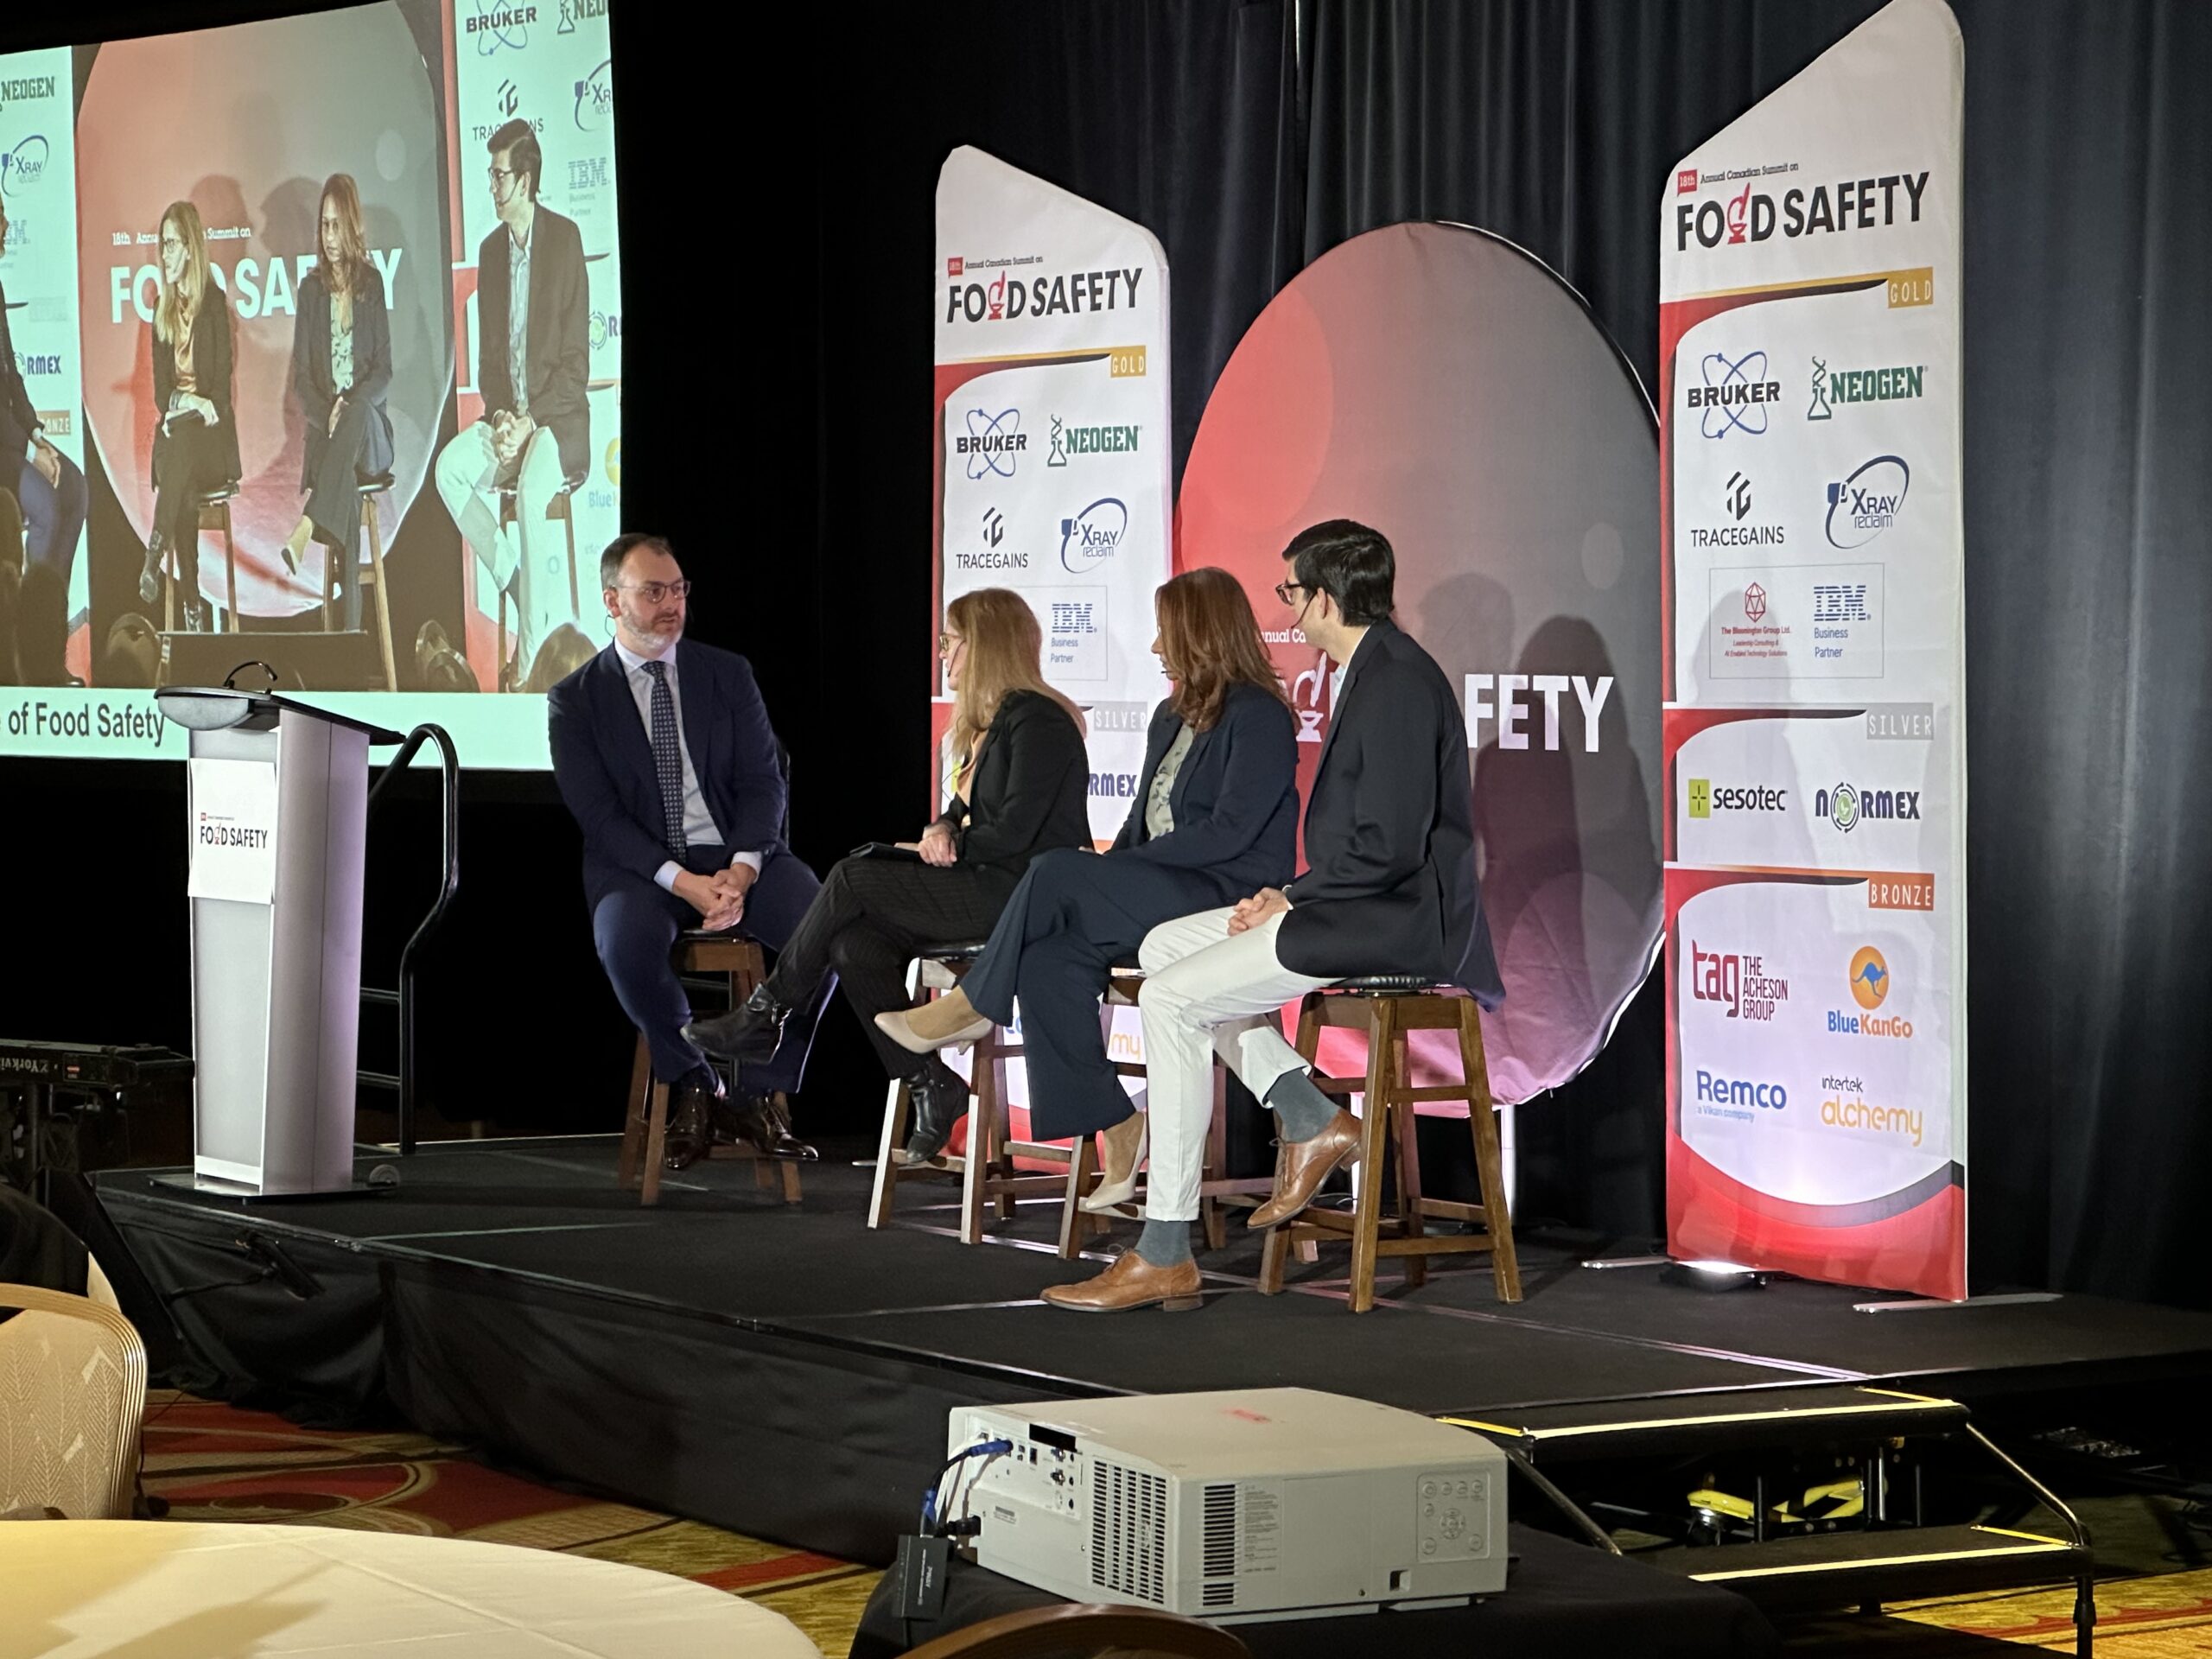 Canadian Summit on Food Safety